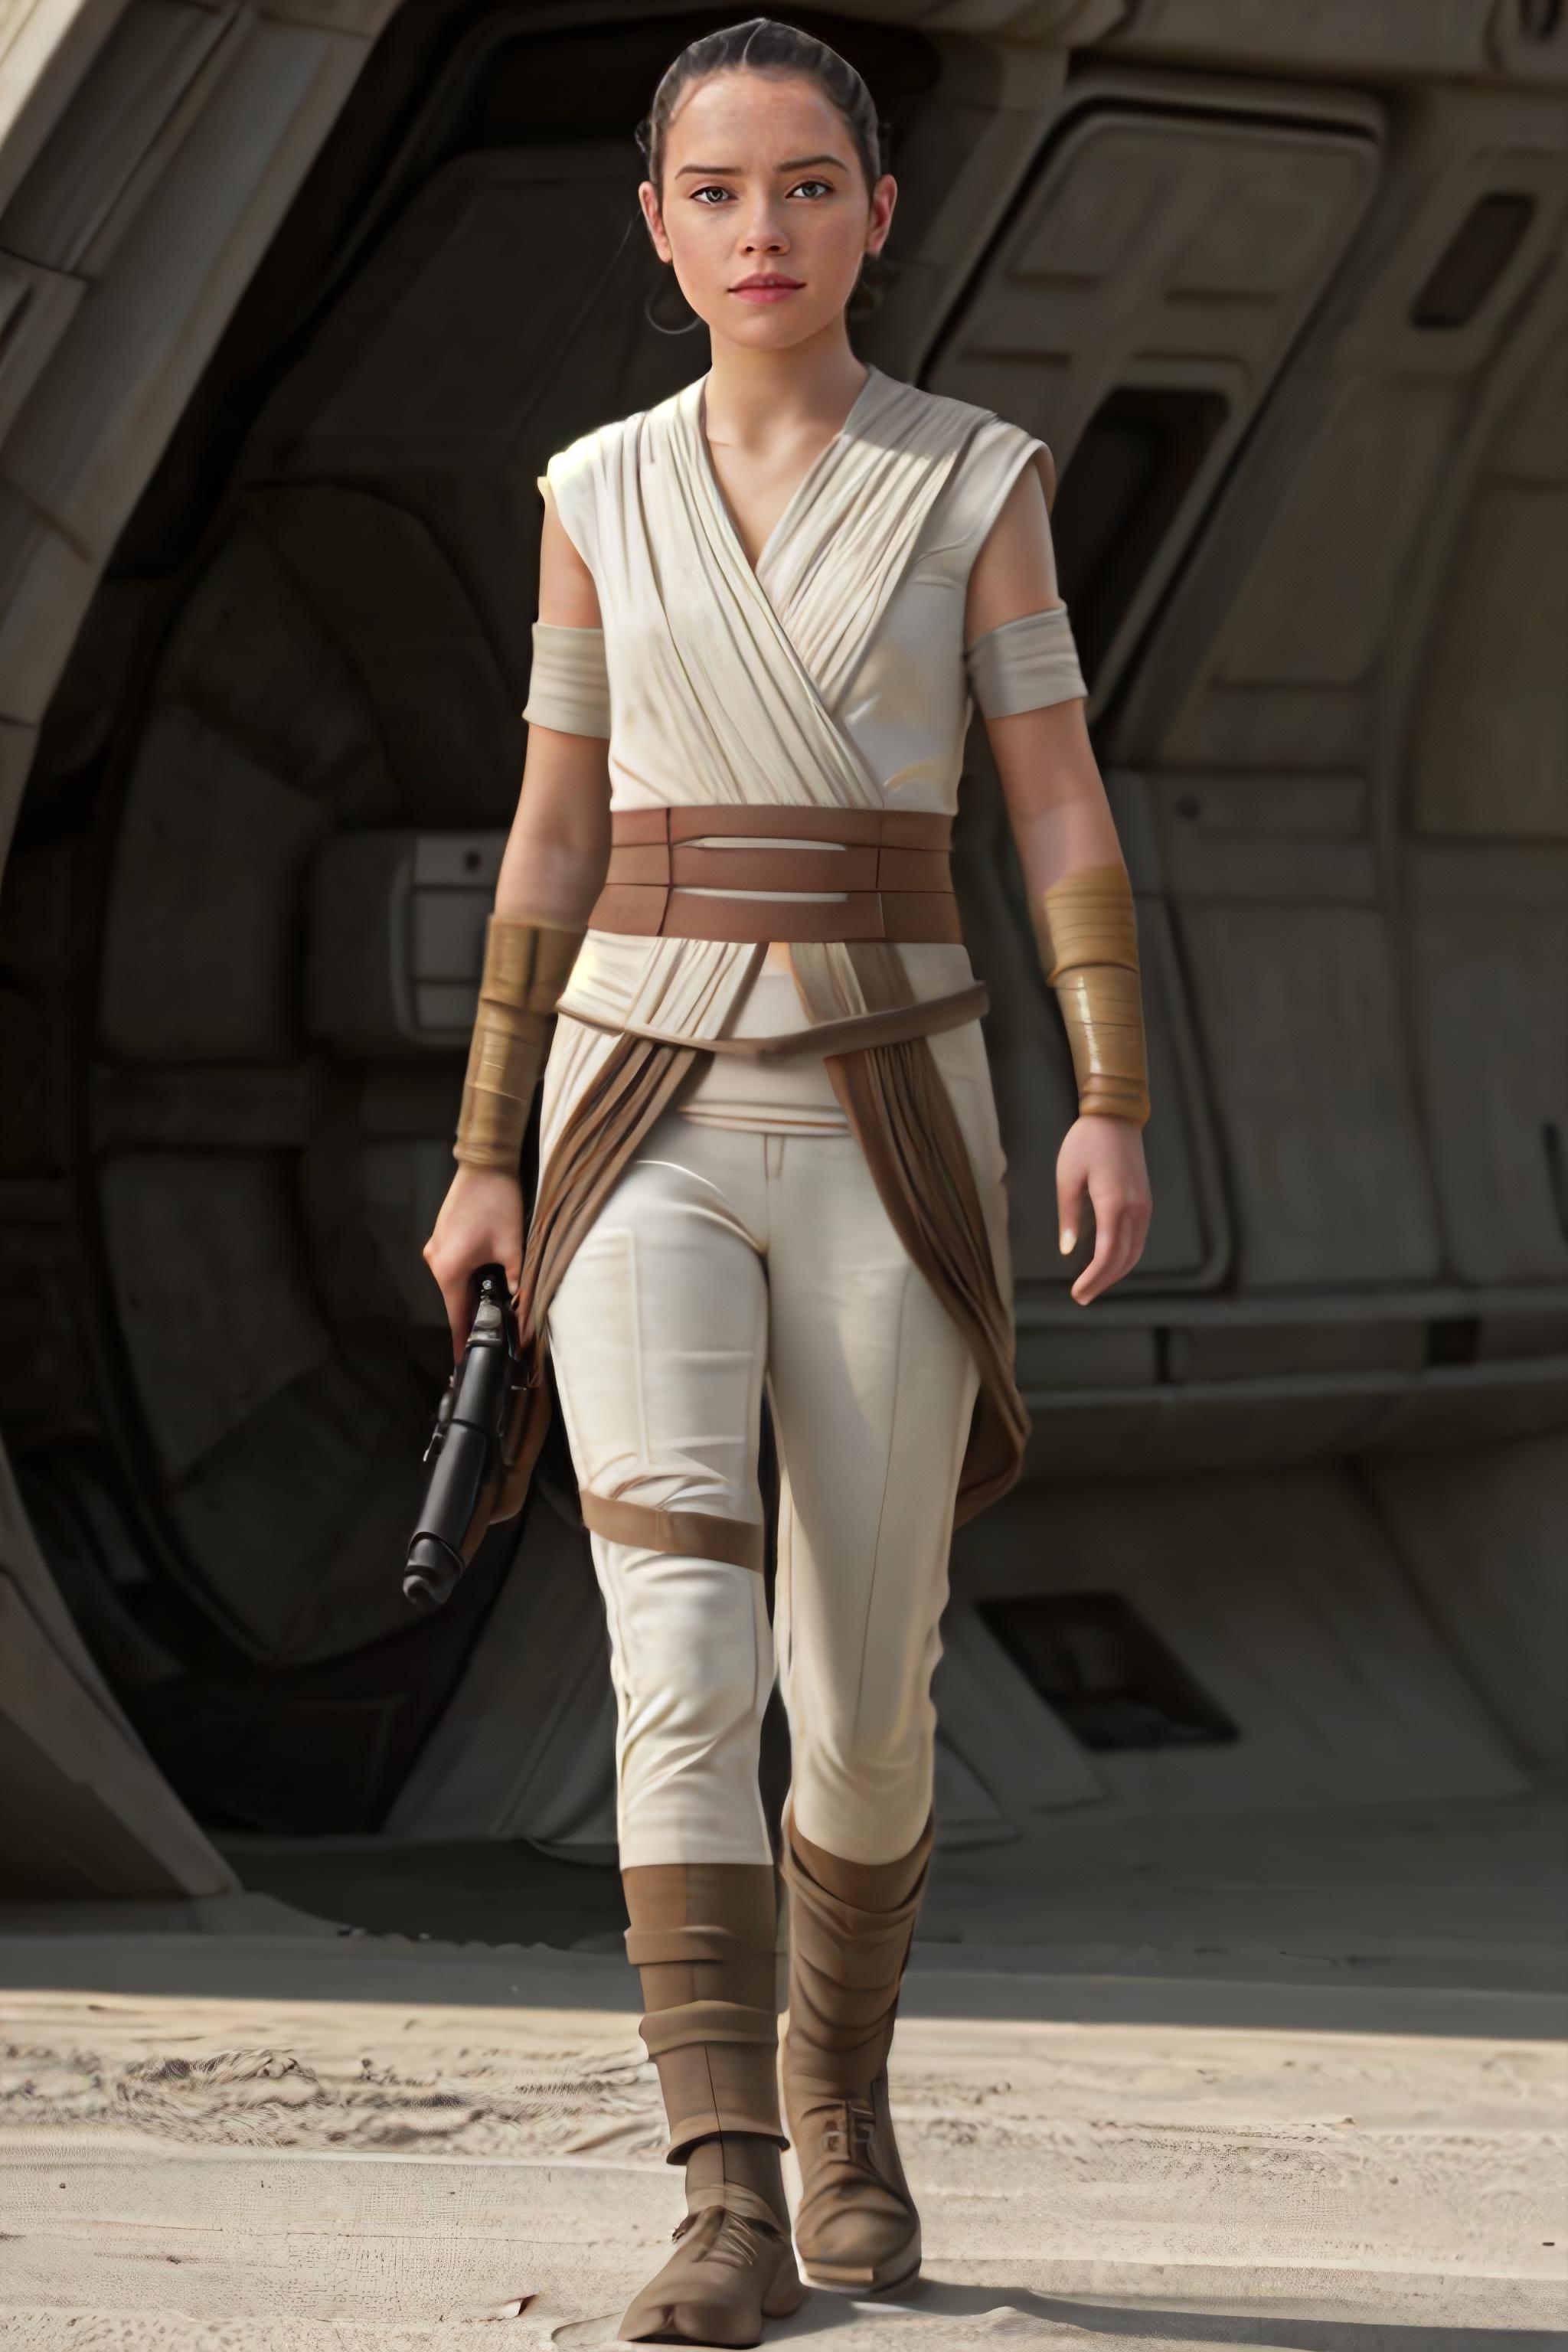 Daisey Ridley / Rey image by __2_